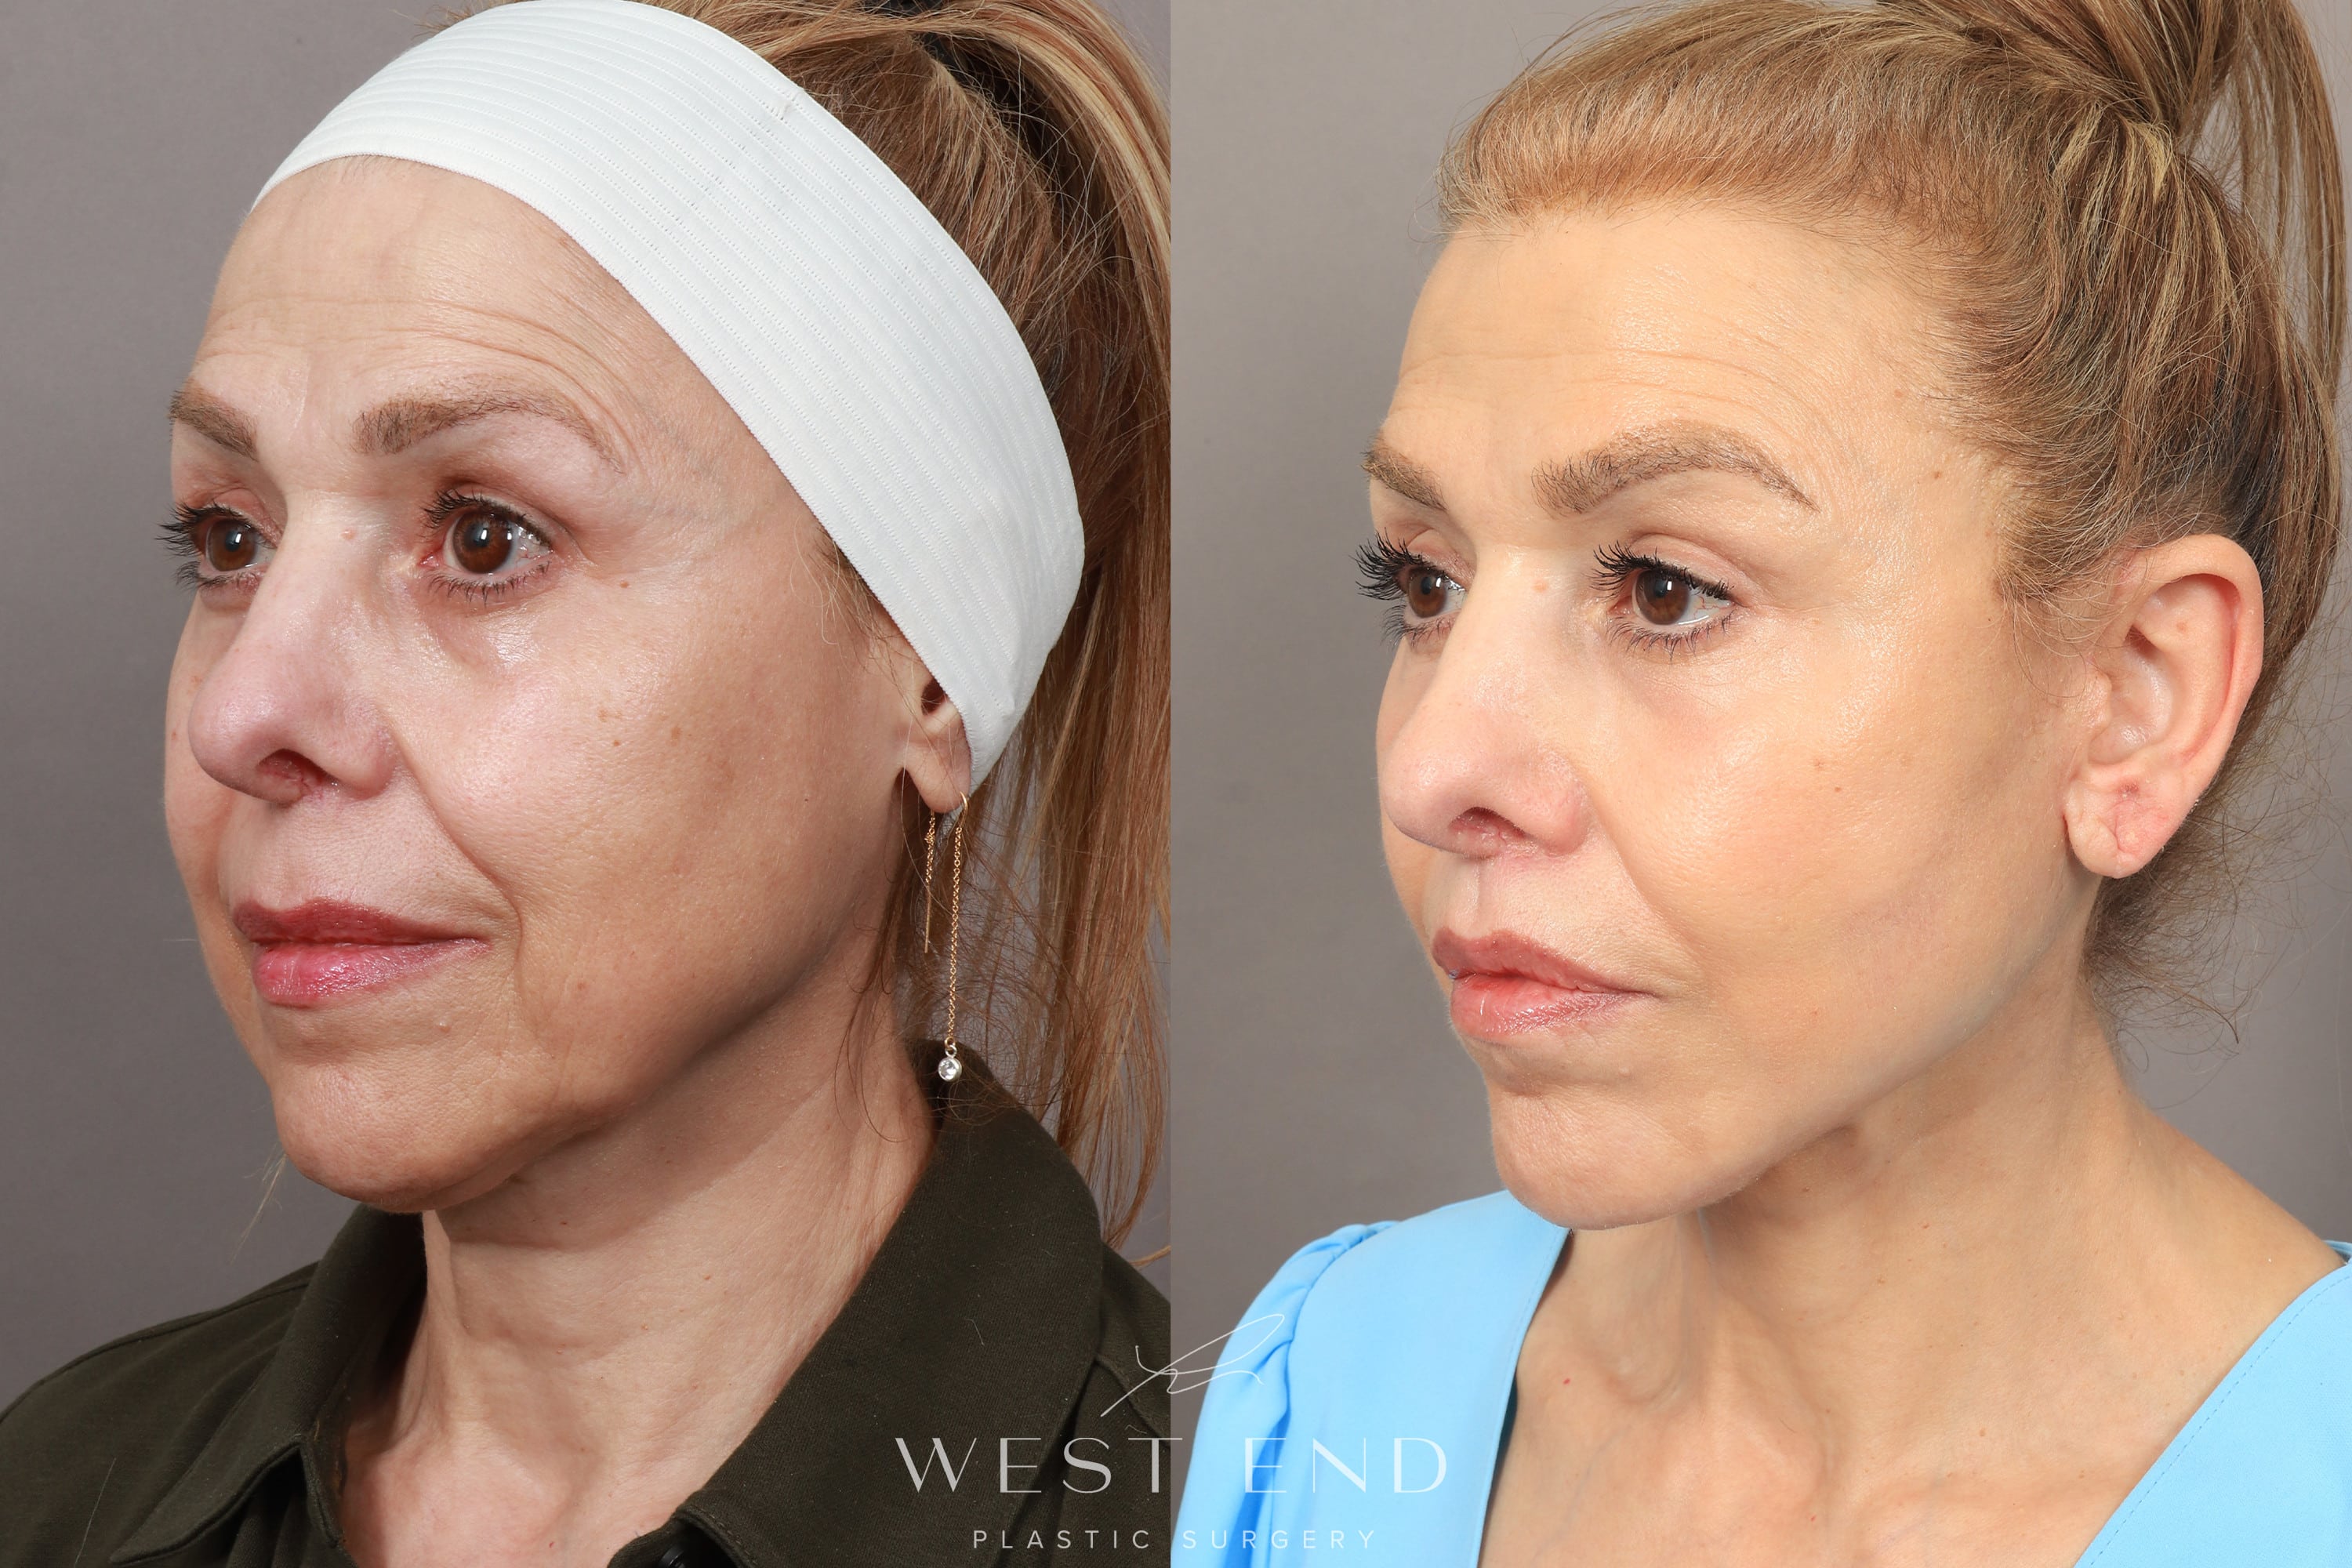 Deep Plane Facelift and Neck Lift, Brow Lift, Blepharoplasty (Eyelid Lift), Lip Lift, Fat Grafting, and CO2 Resurfacing.